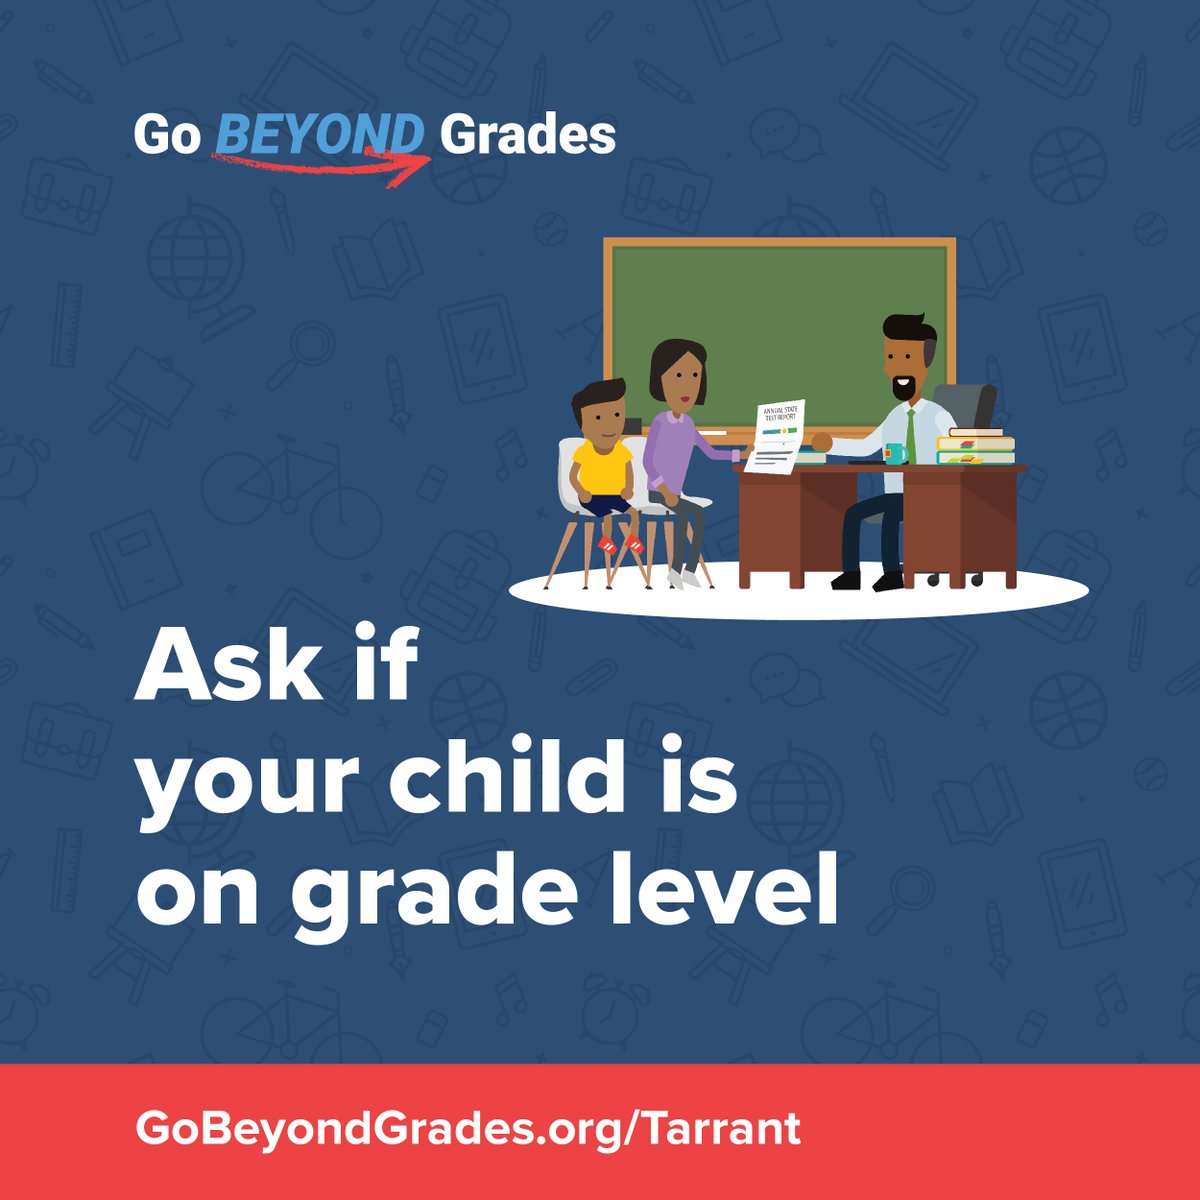 Fort Worth parents are strong advocates for their child’s education, but many do not know that their child is behind. That’s why I joined #GoBeyondGrades, a campaign urging parents to know if their child is on grade level and tools to help them catch up. 🔗GoBeyondGrades.org/TARRANT